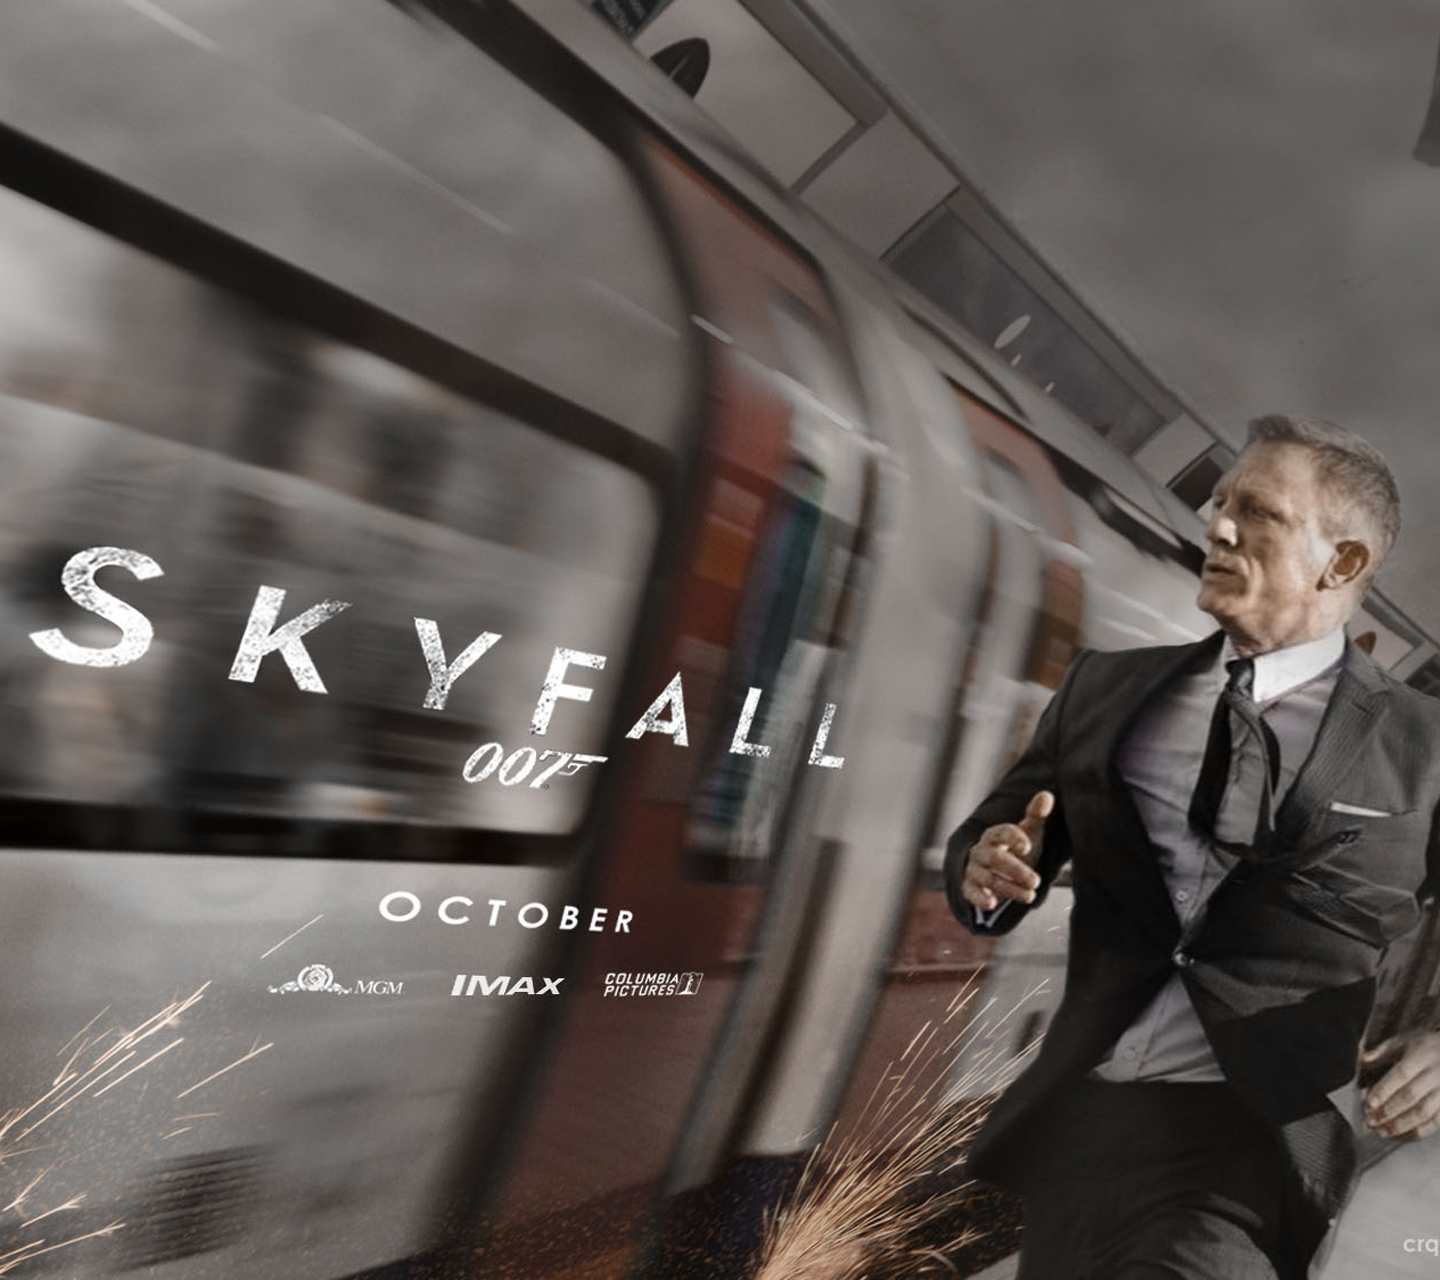 Skyfall for apple download